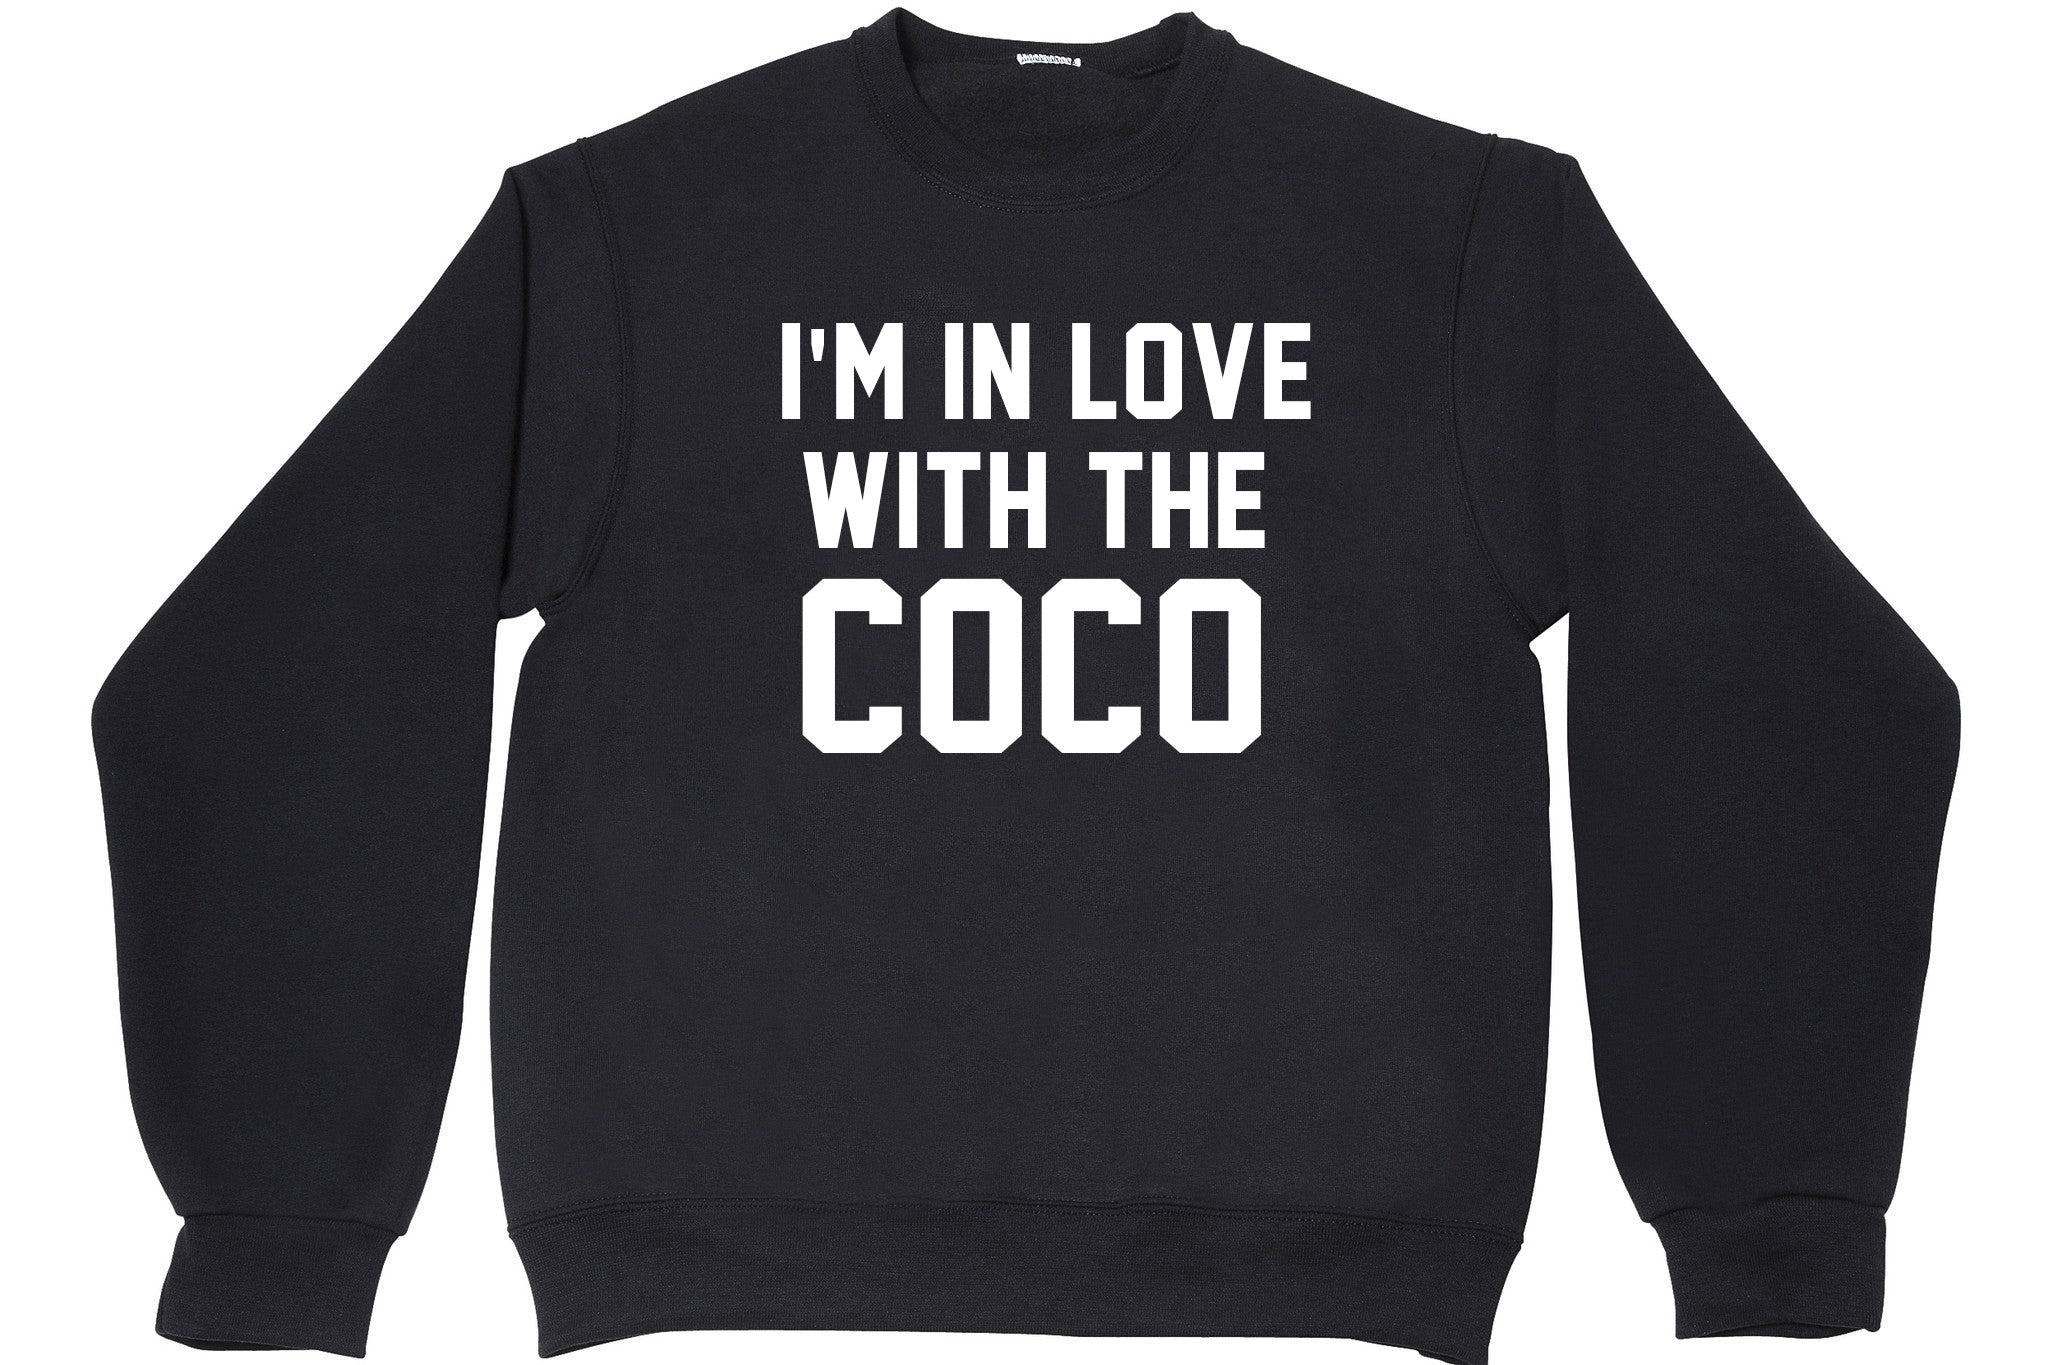 I'M IN LOVE WITH THE COCO